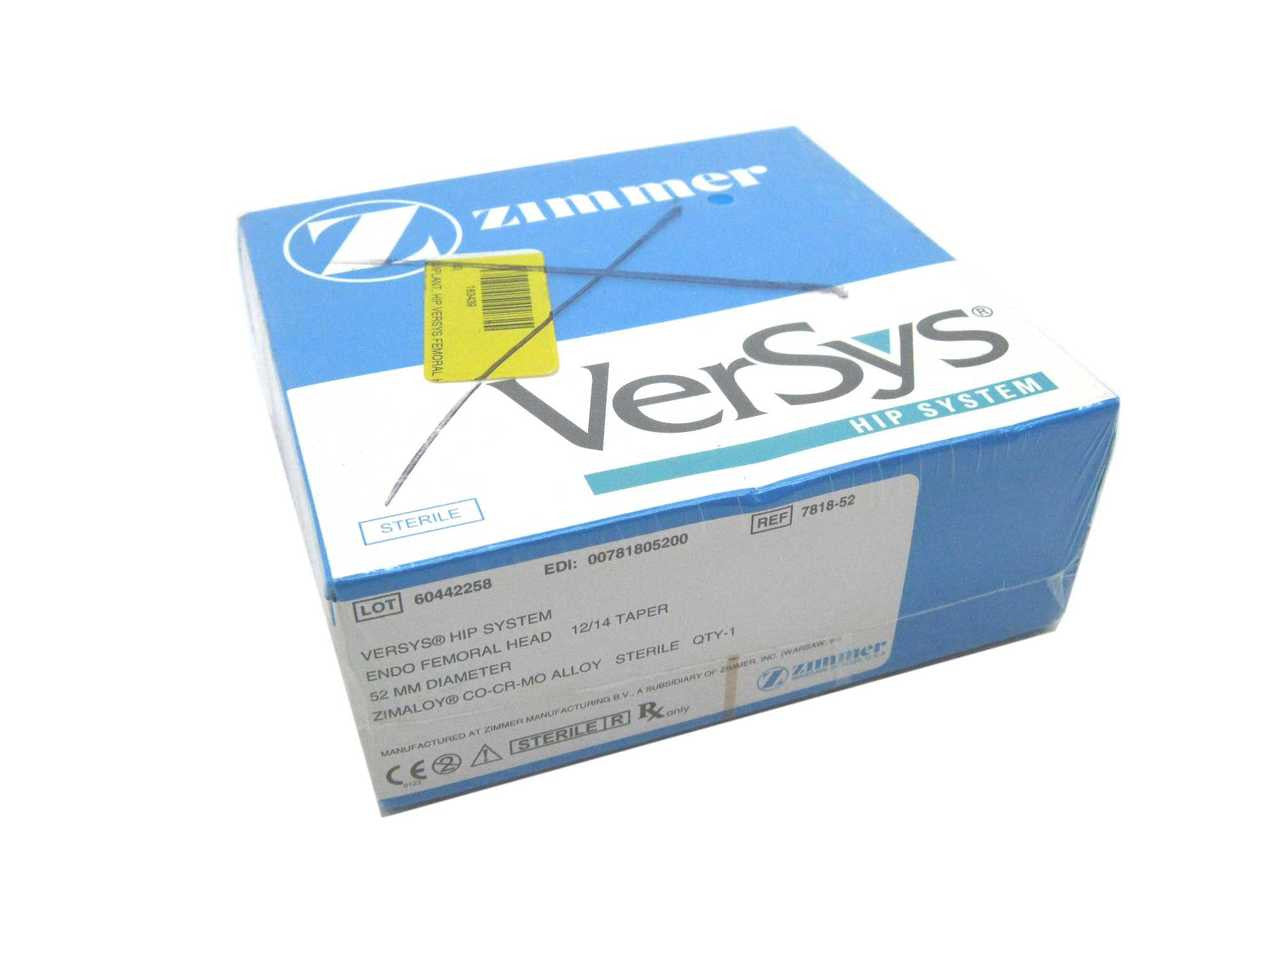    Versys Hip System, Endo Femoral Head, 52mm - 7818-52